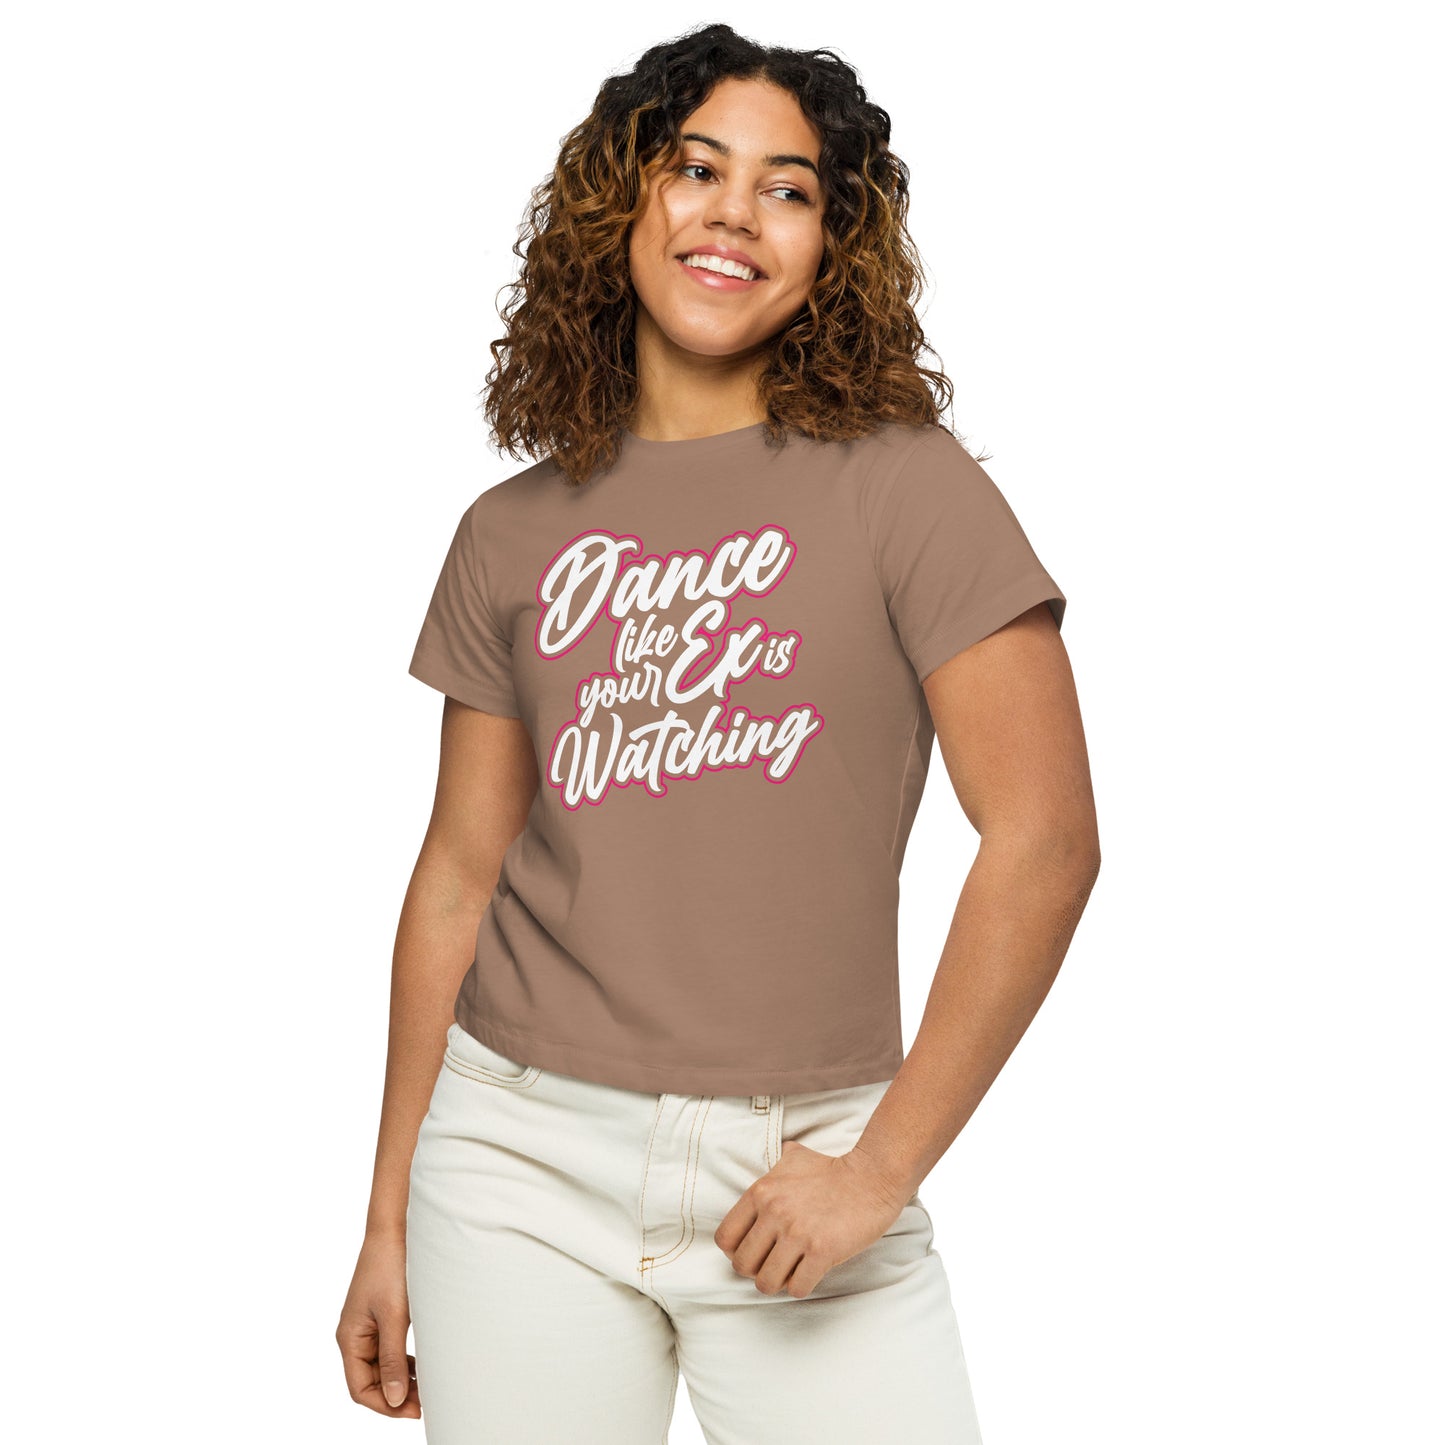 Dance Like Your Ex Is Watching - Women’s high-waisted t-shirt